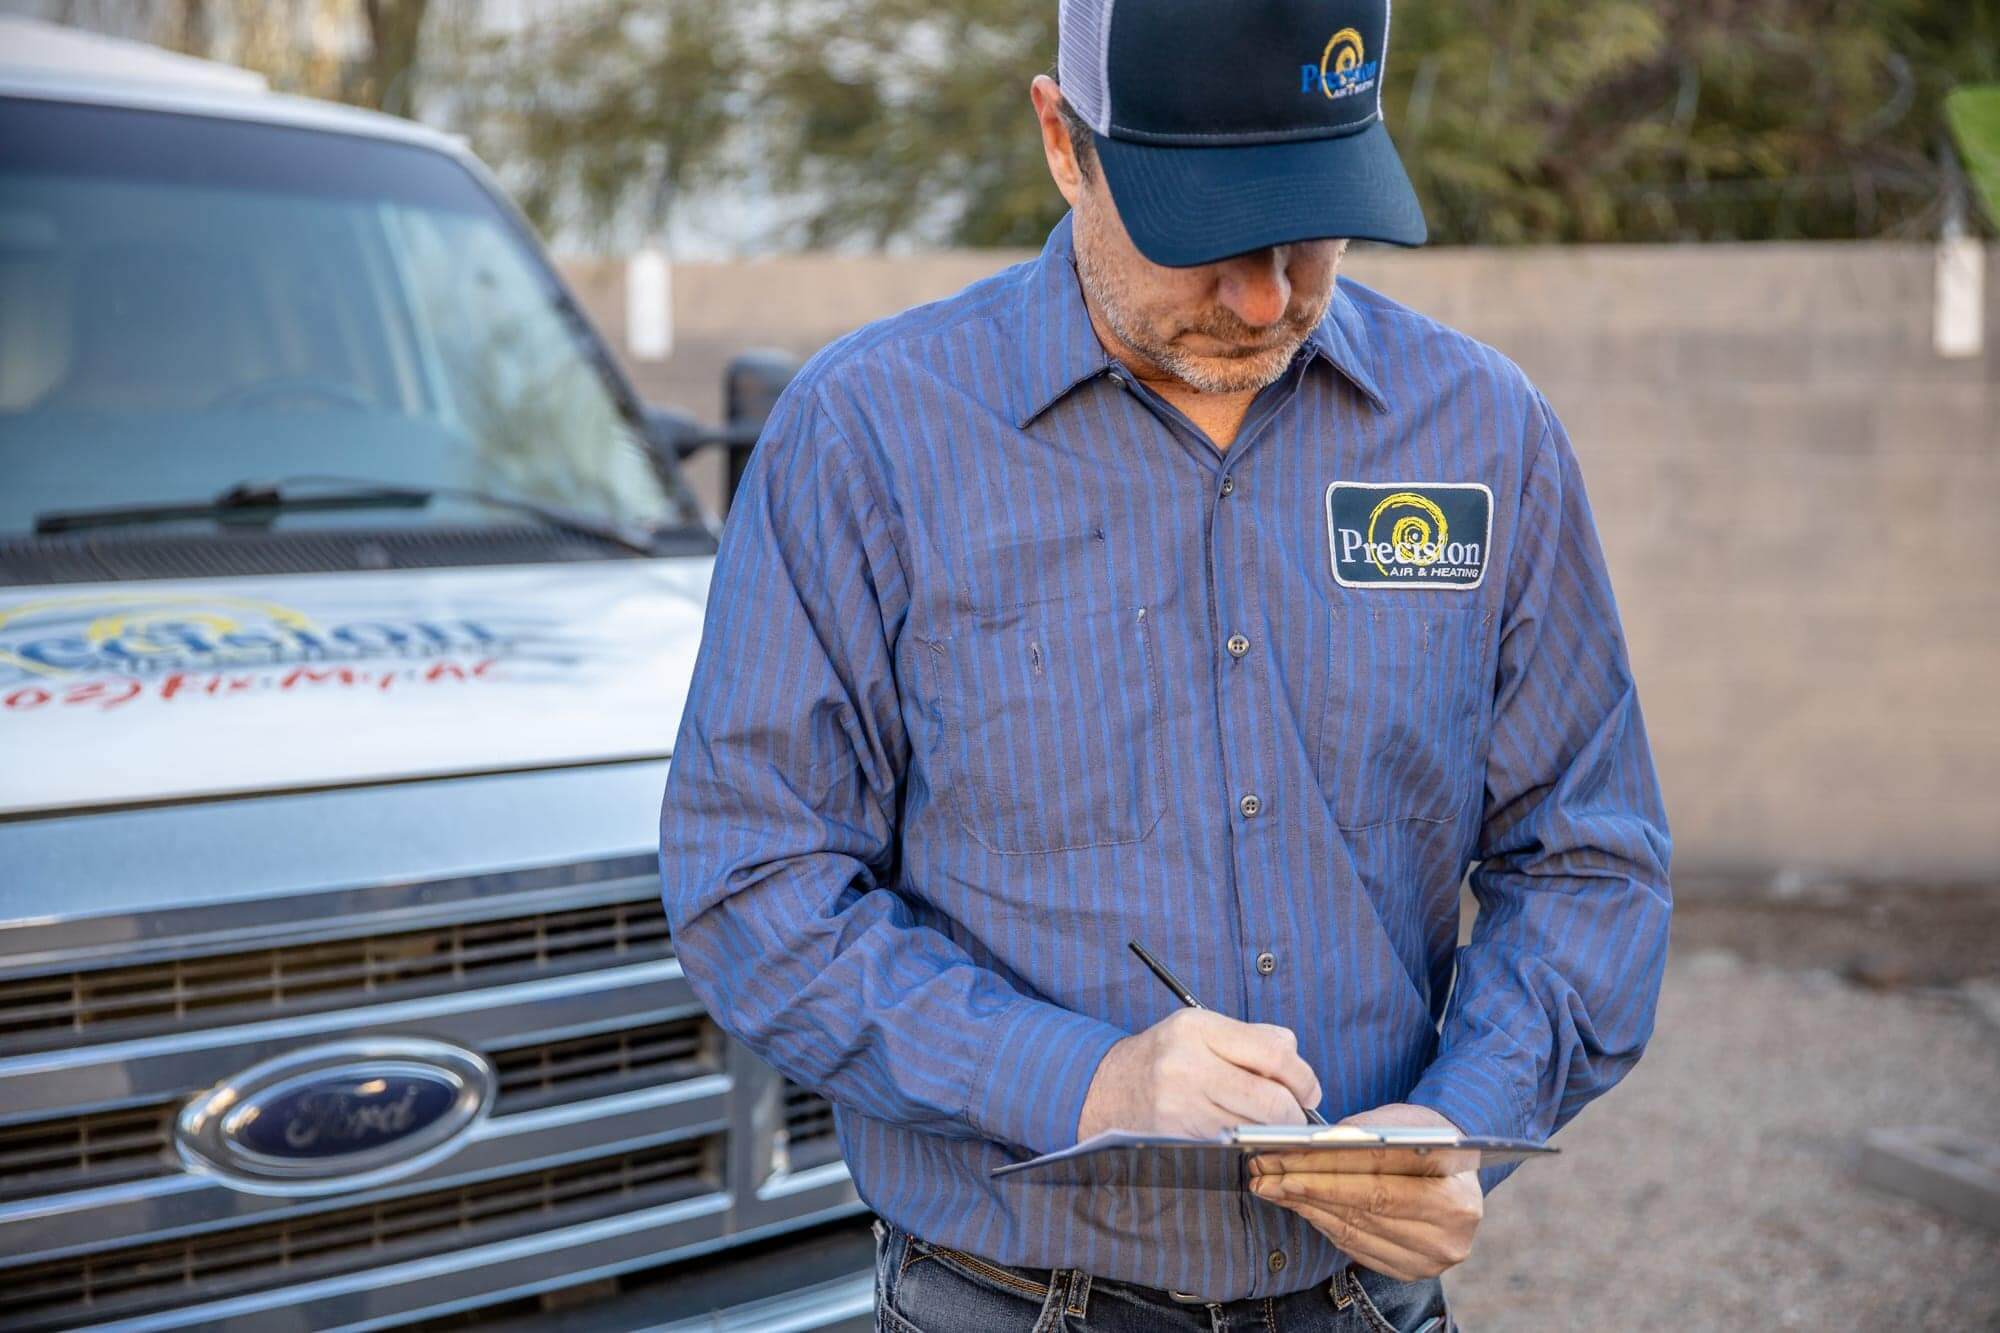 Precision AC Tech reviews work order in front of work truck